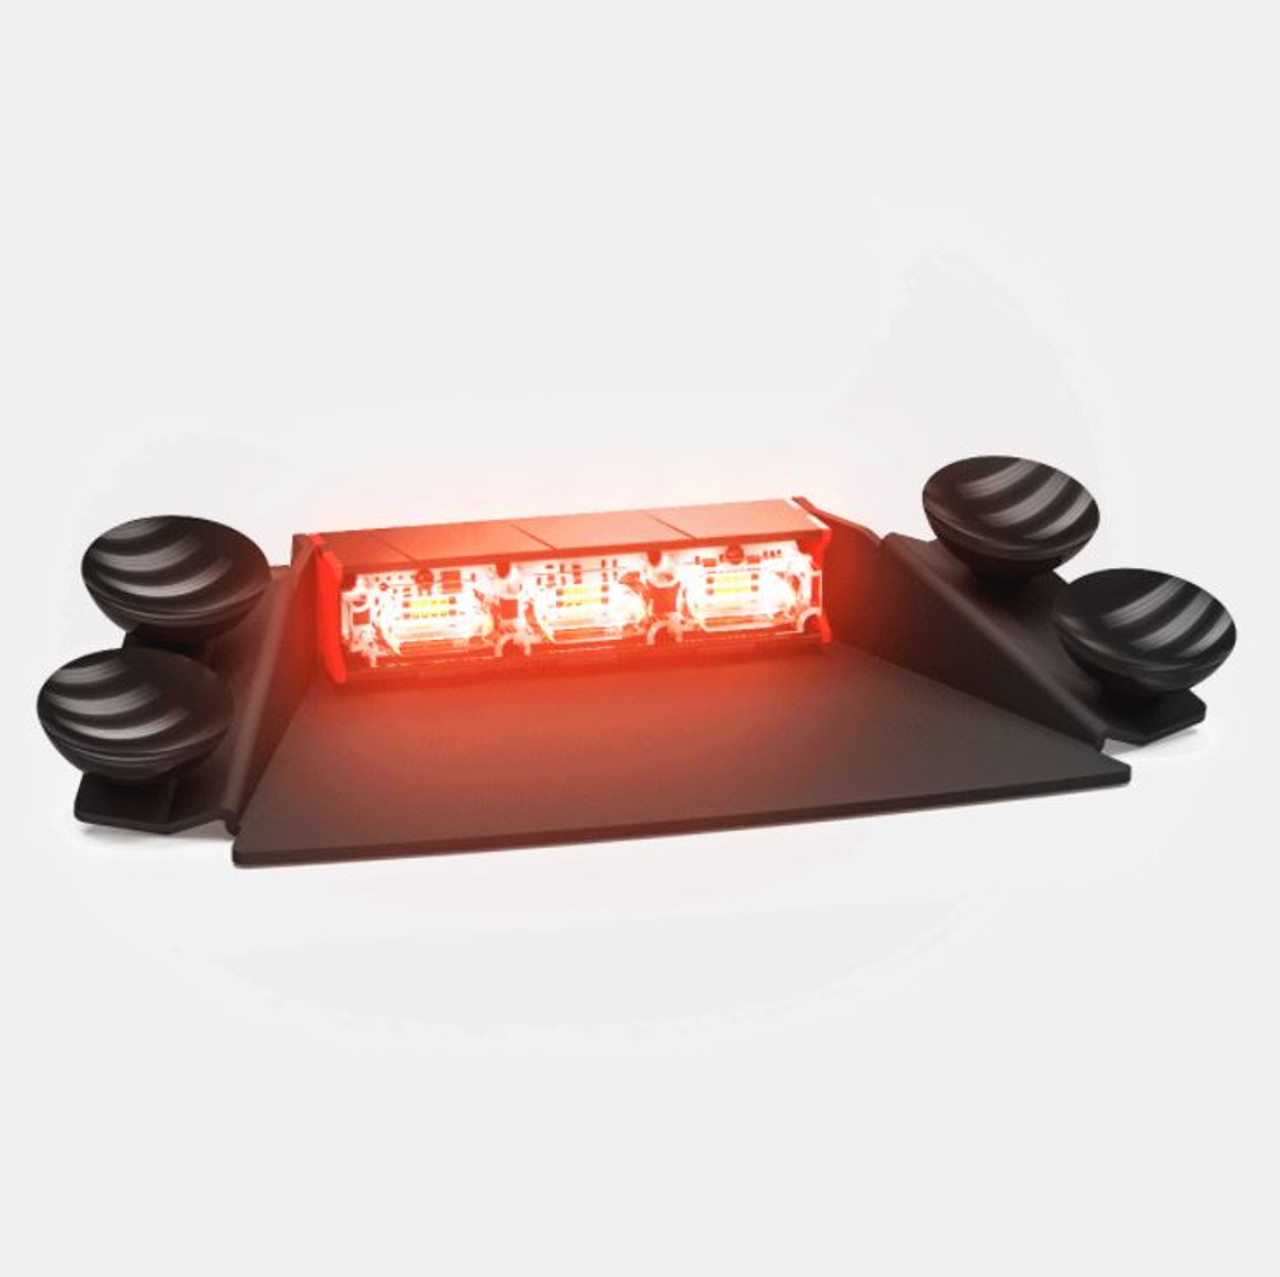 Feniex Q-1120 Quad 1X LED Dash Light, Single Head with Four Colors, Suction Cup Mount, includes 8 foot 12V cigarette plug (Red, Blue, White and Amber)